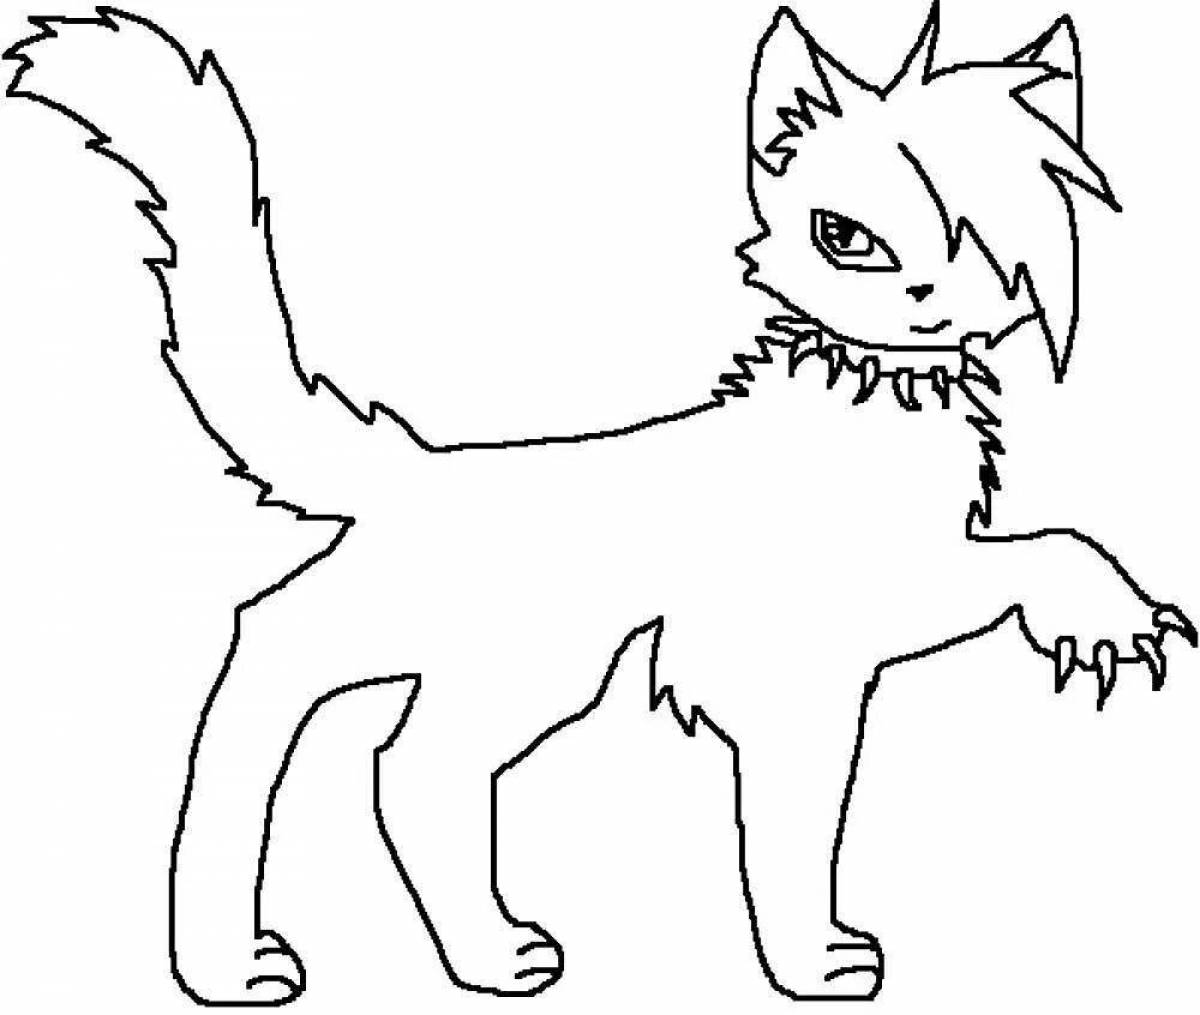 Warrior cats scourge #2